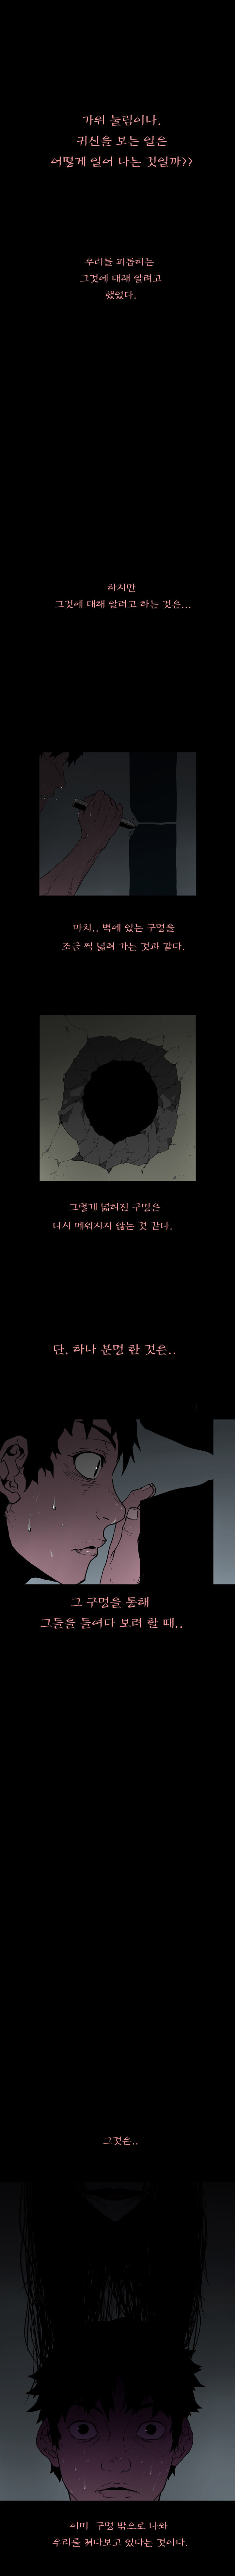 0.0MHz - Chapter 프롤로그 - Page 1